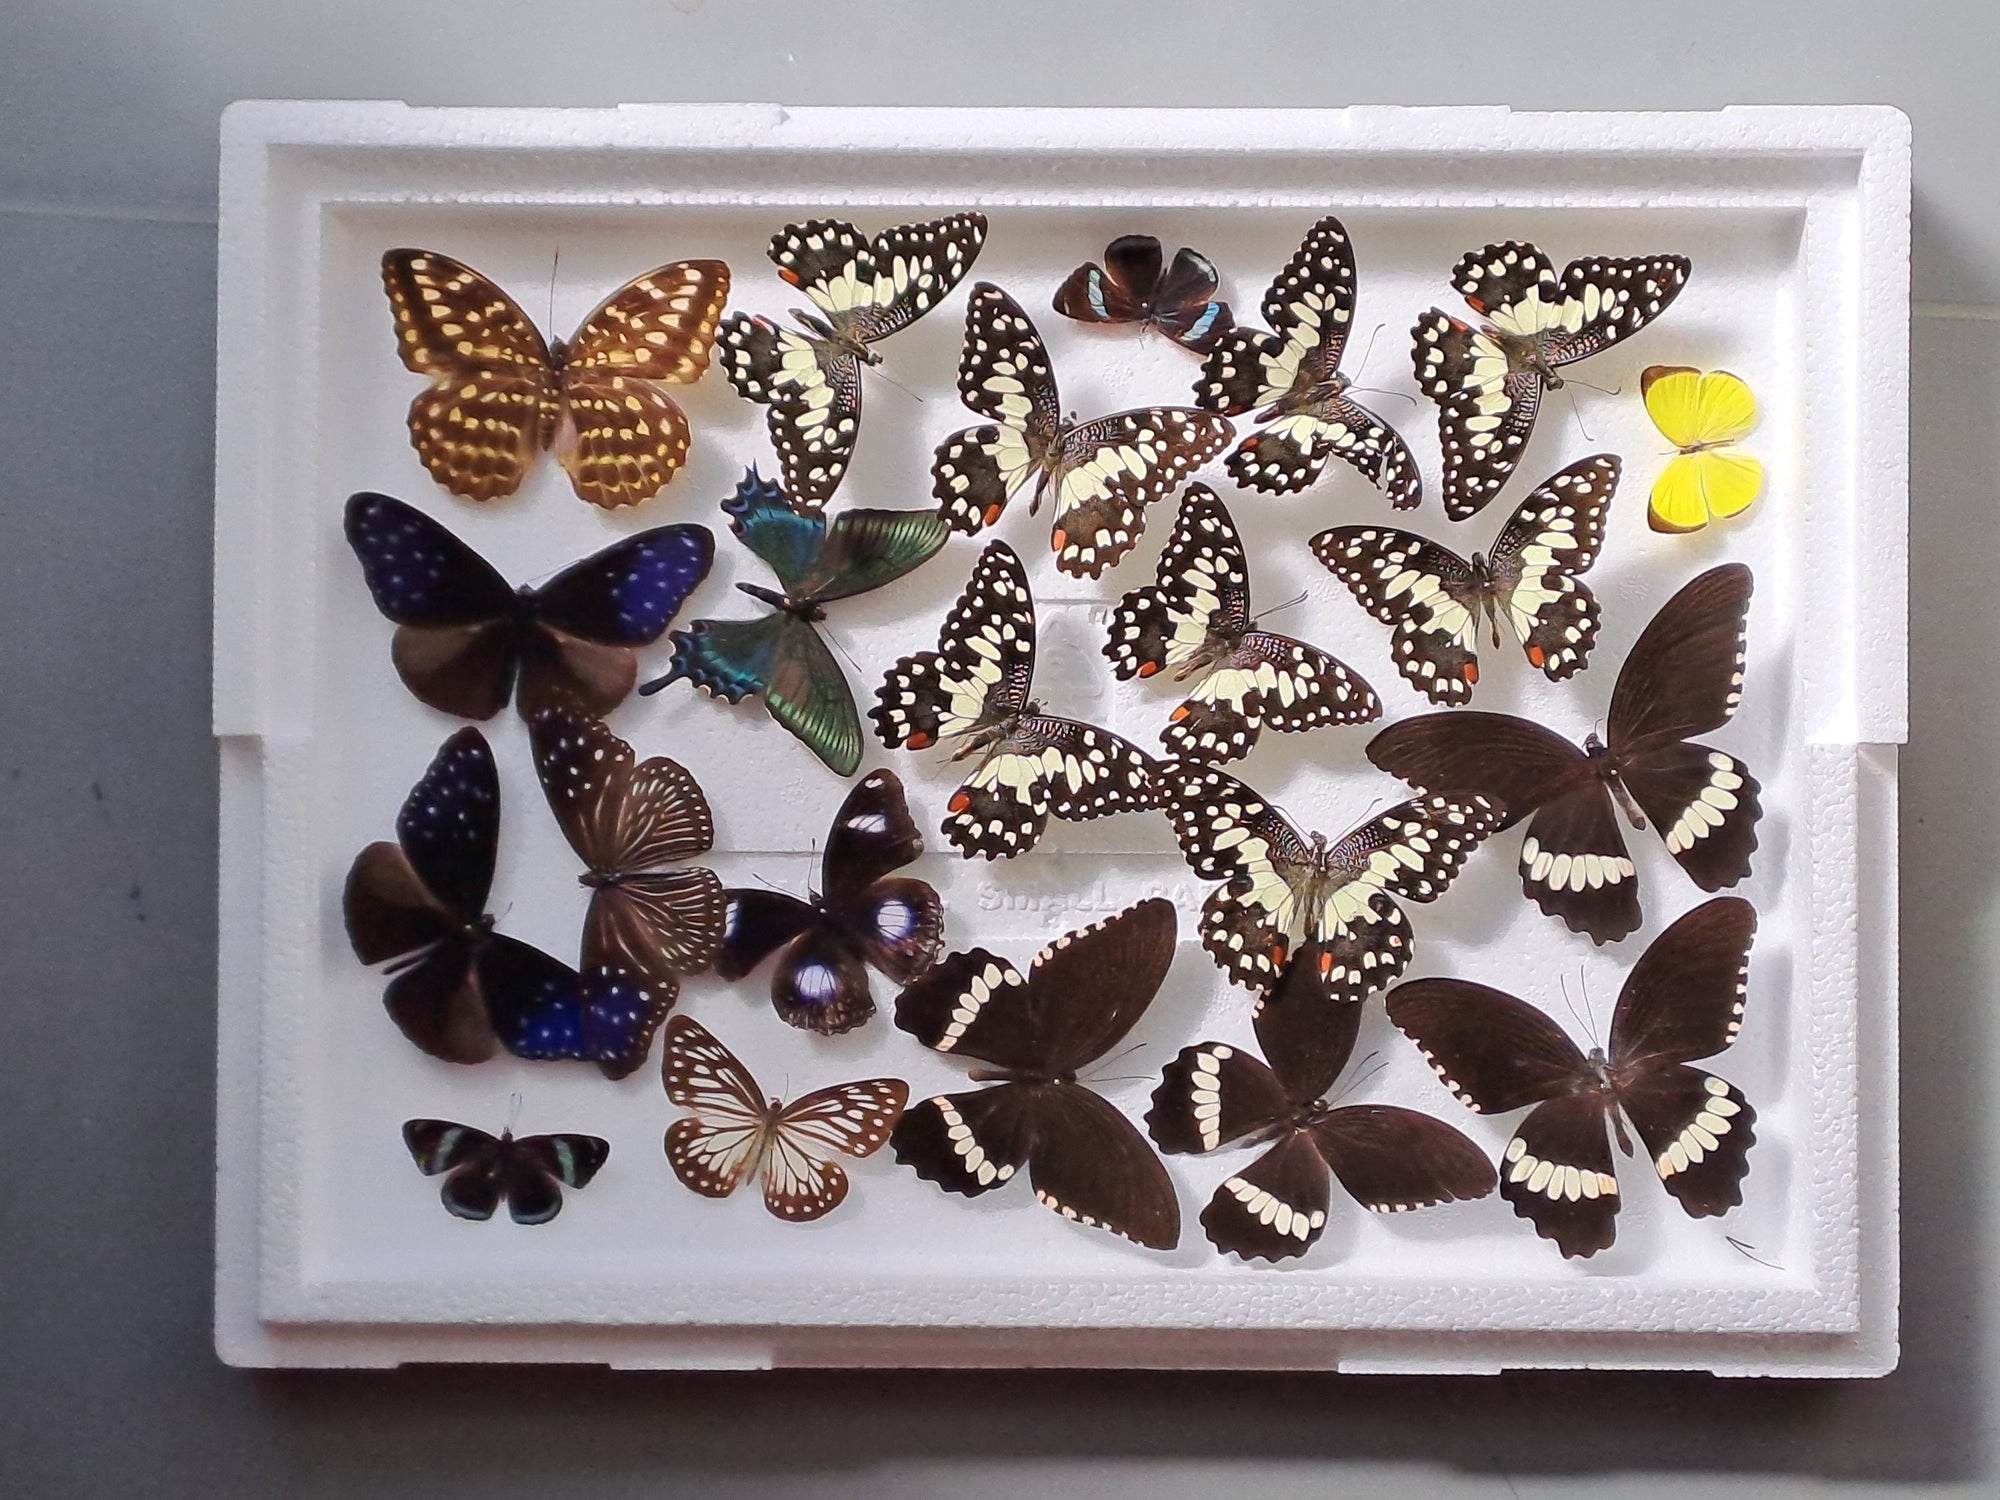 DAMAGED BUTTERFLIES as seen in photo. Broken specimens good for art and craft projects (BOX No. 9)